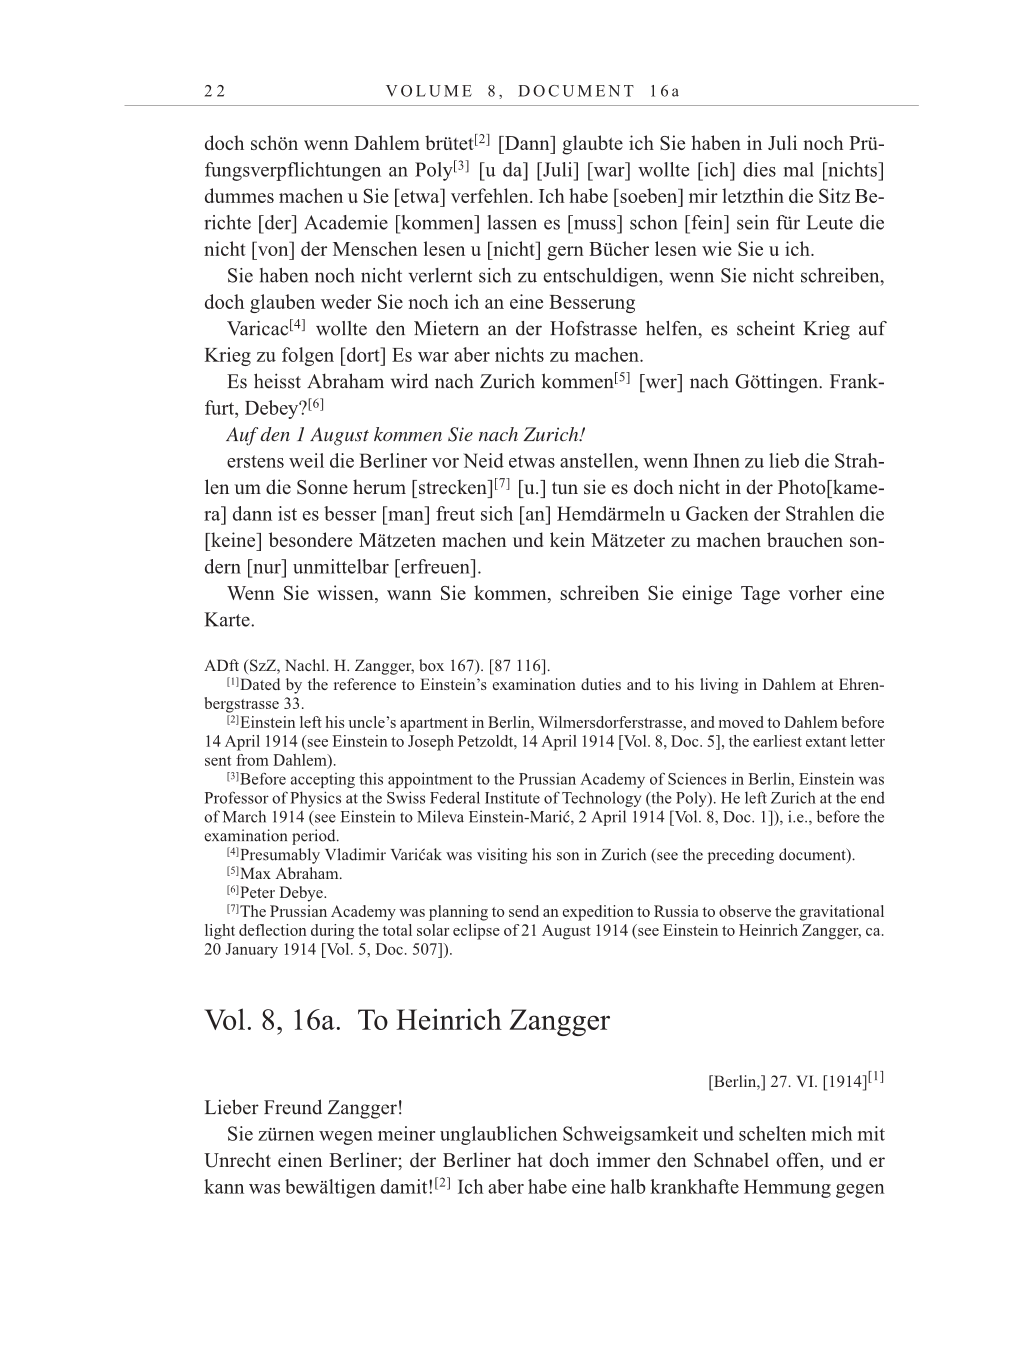 Volume 10: The Berlin Years: Correspondence May-December 1920 / Supplementary Correspondence 1909-1920 page 22